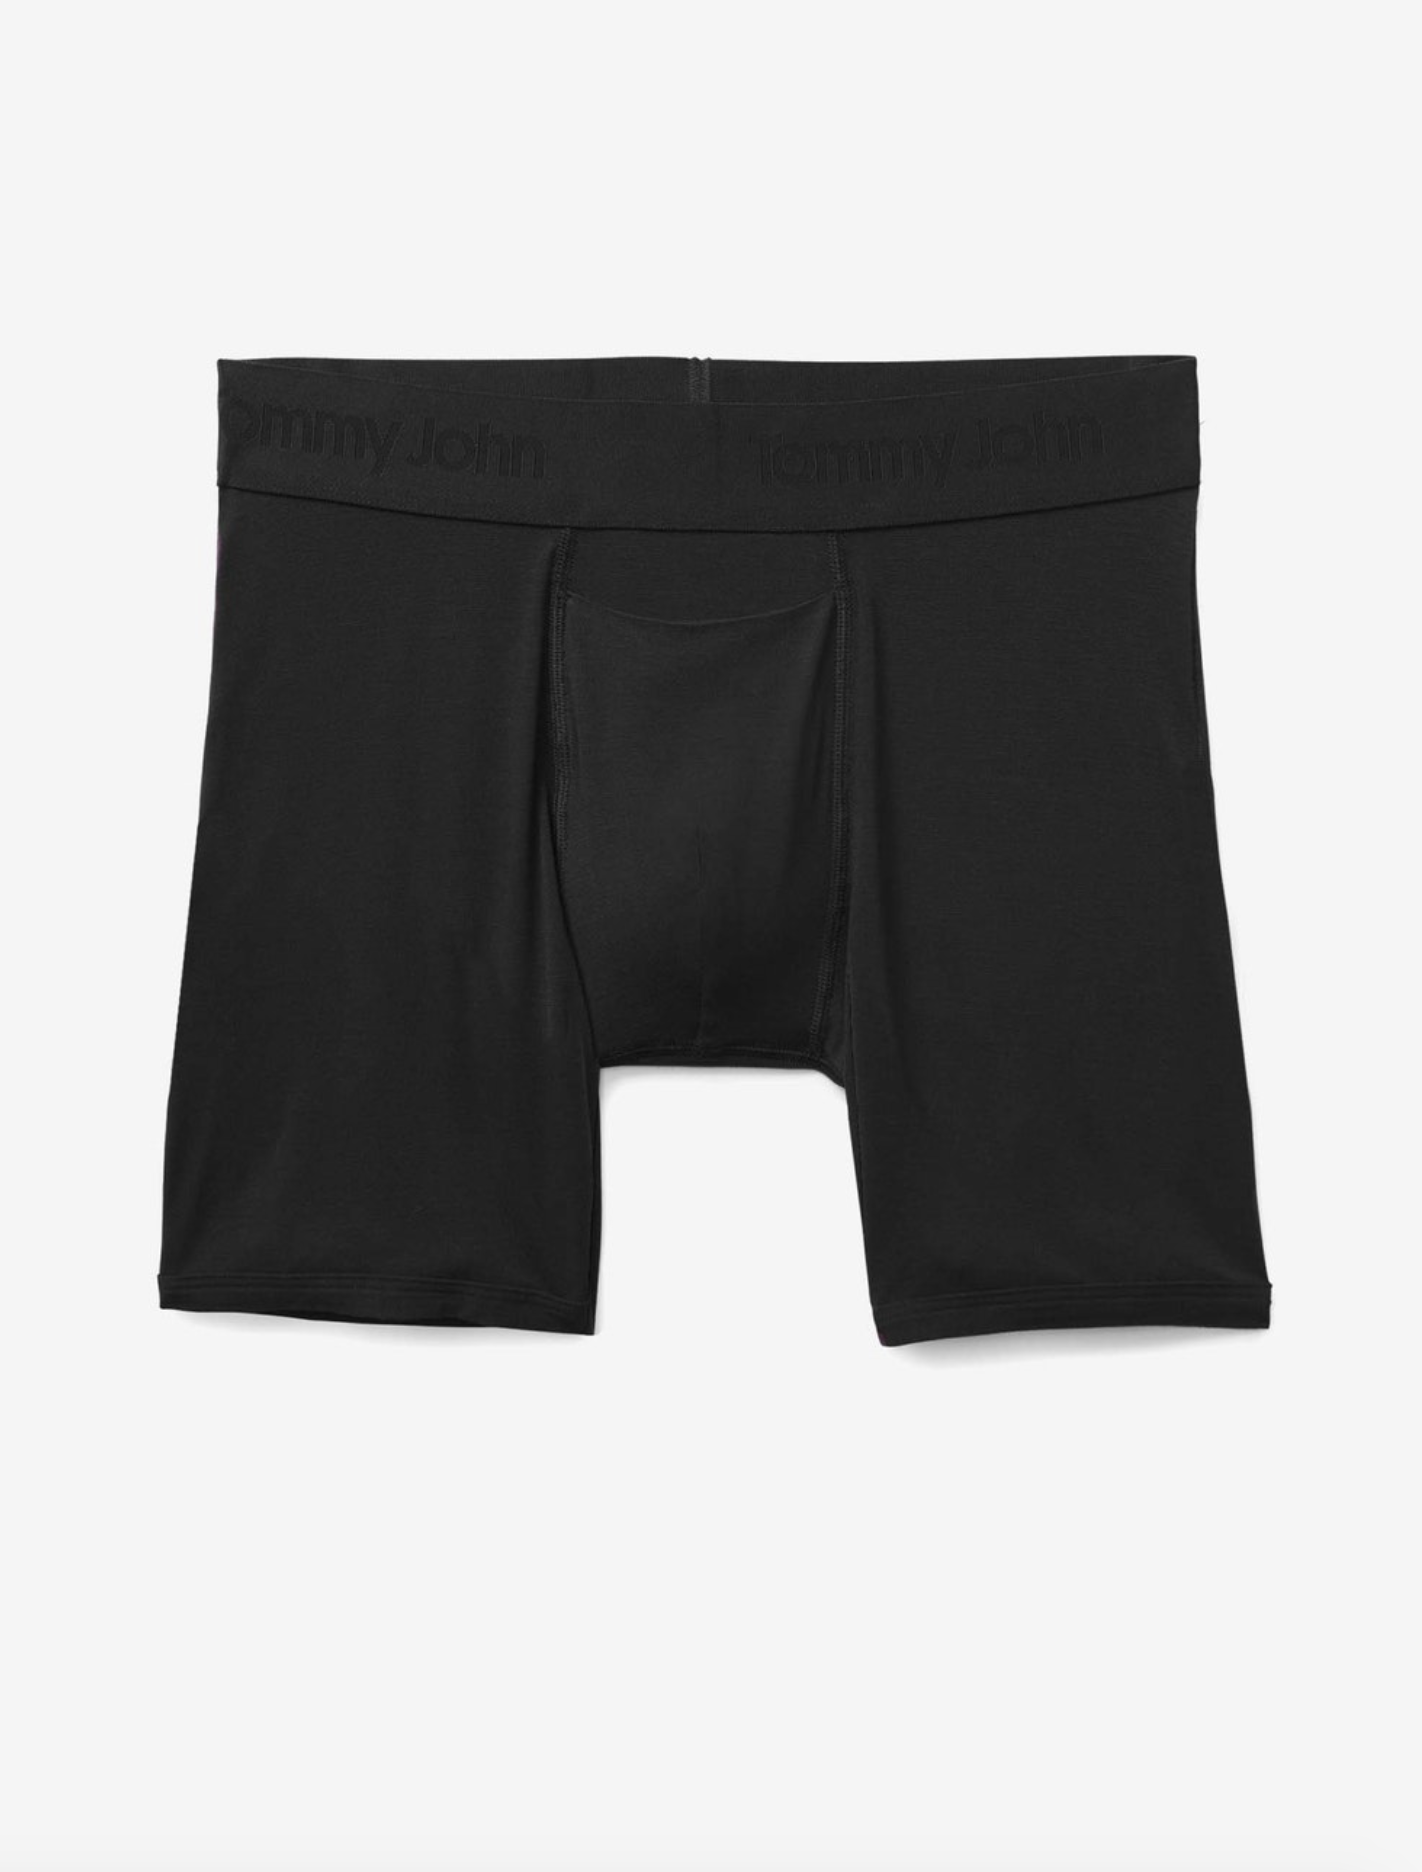 tommy john second skin boxer briefs